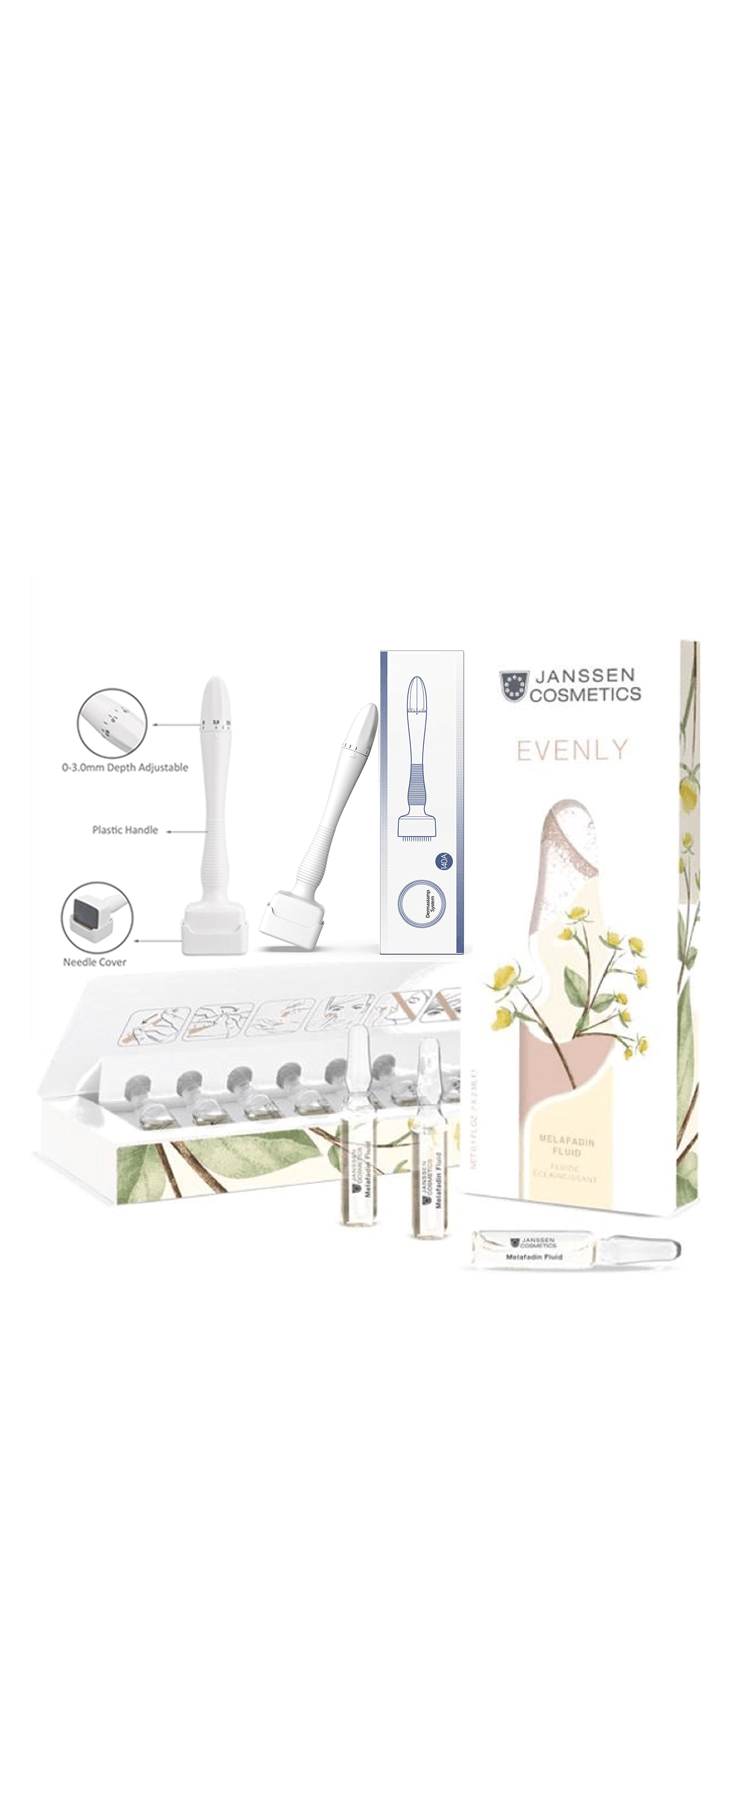 Janssen Cosmetics Evenly Mesotherapy Package